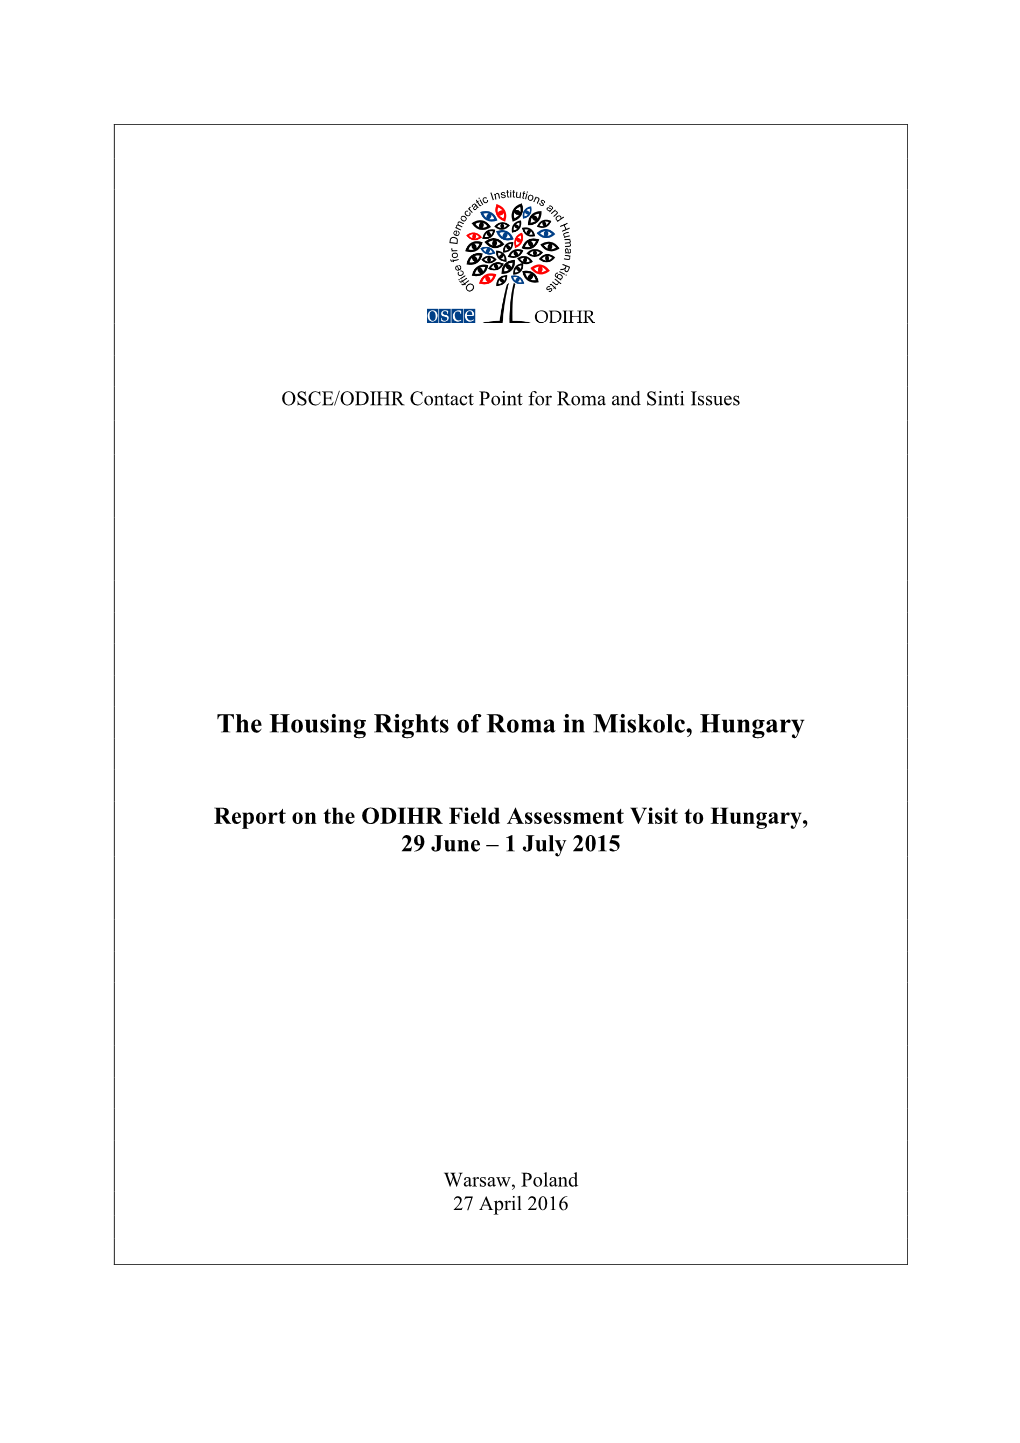 The Housing Rights of Roma in Miskolc, Hungary